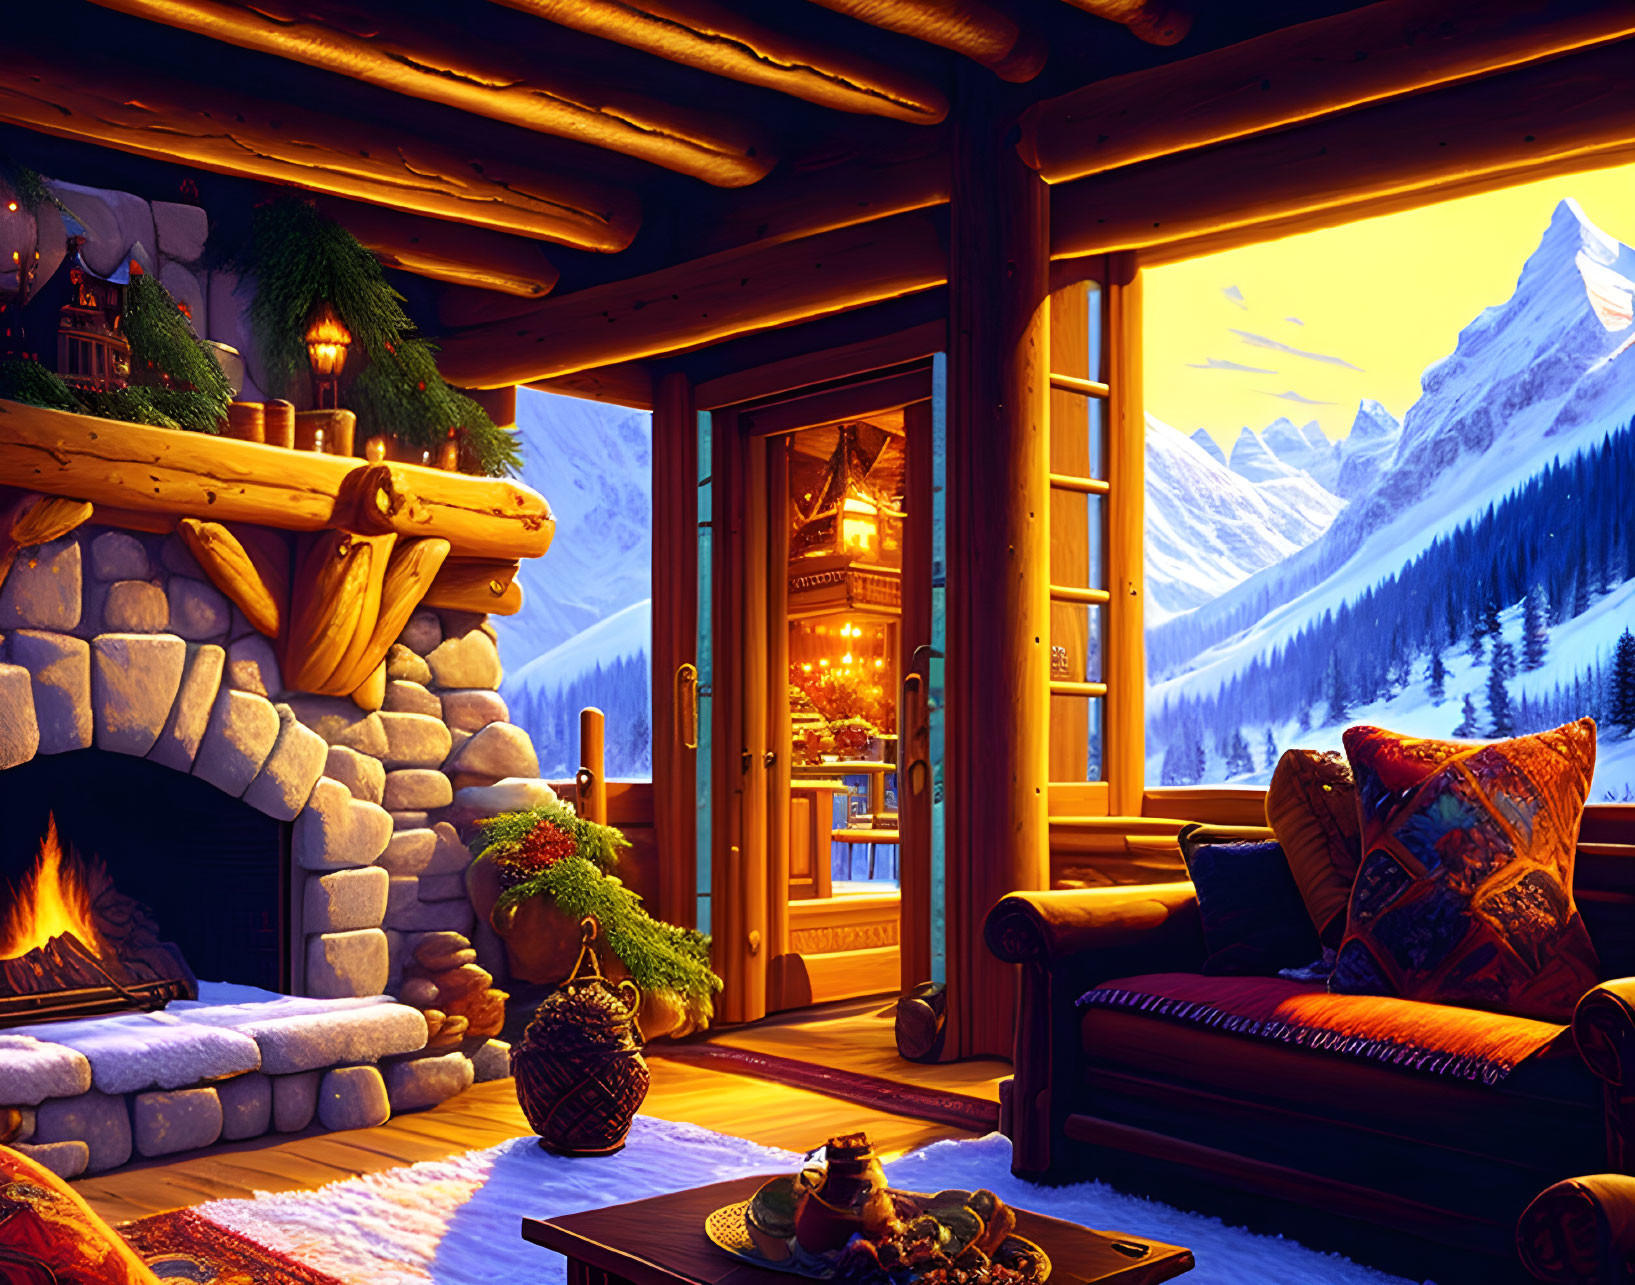 Mountain cabin interior with fireplace, festive decor, snowy peak view